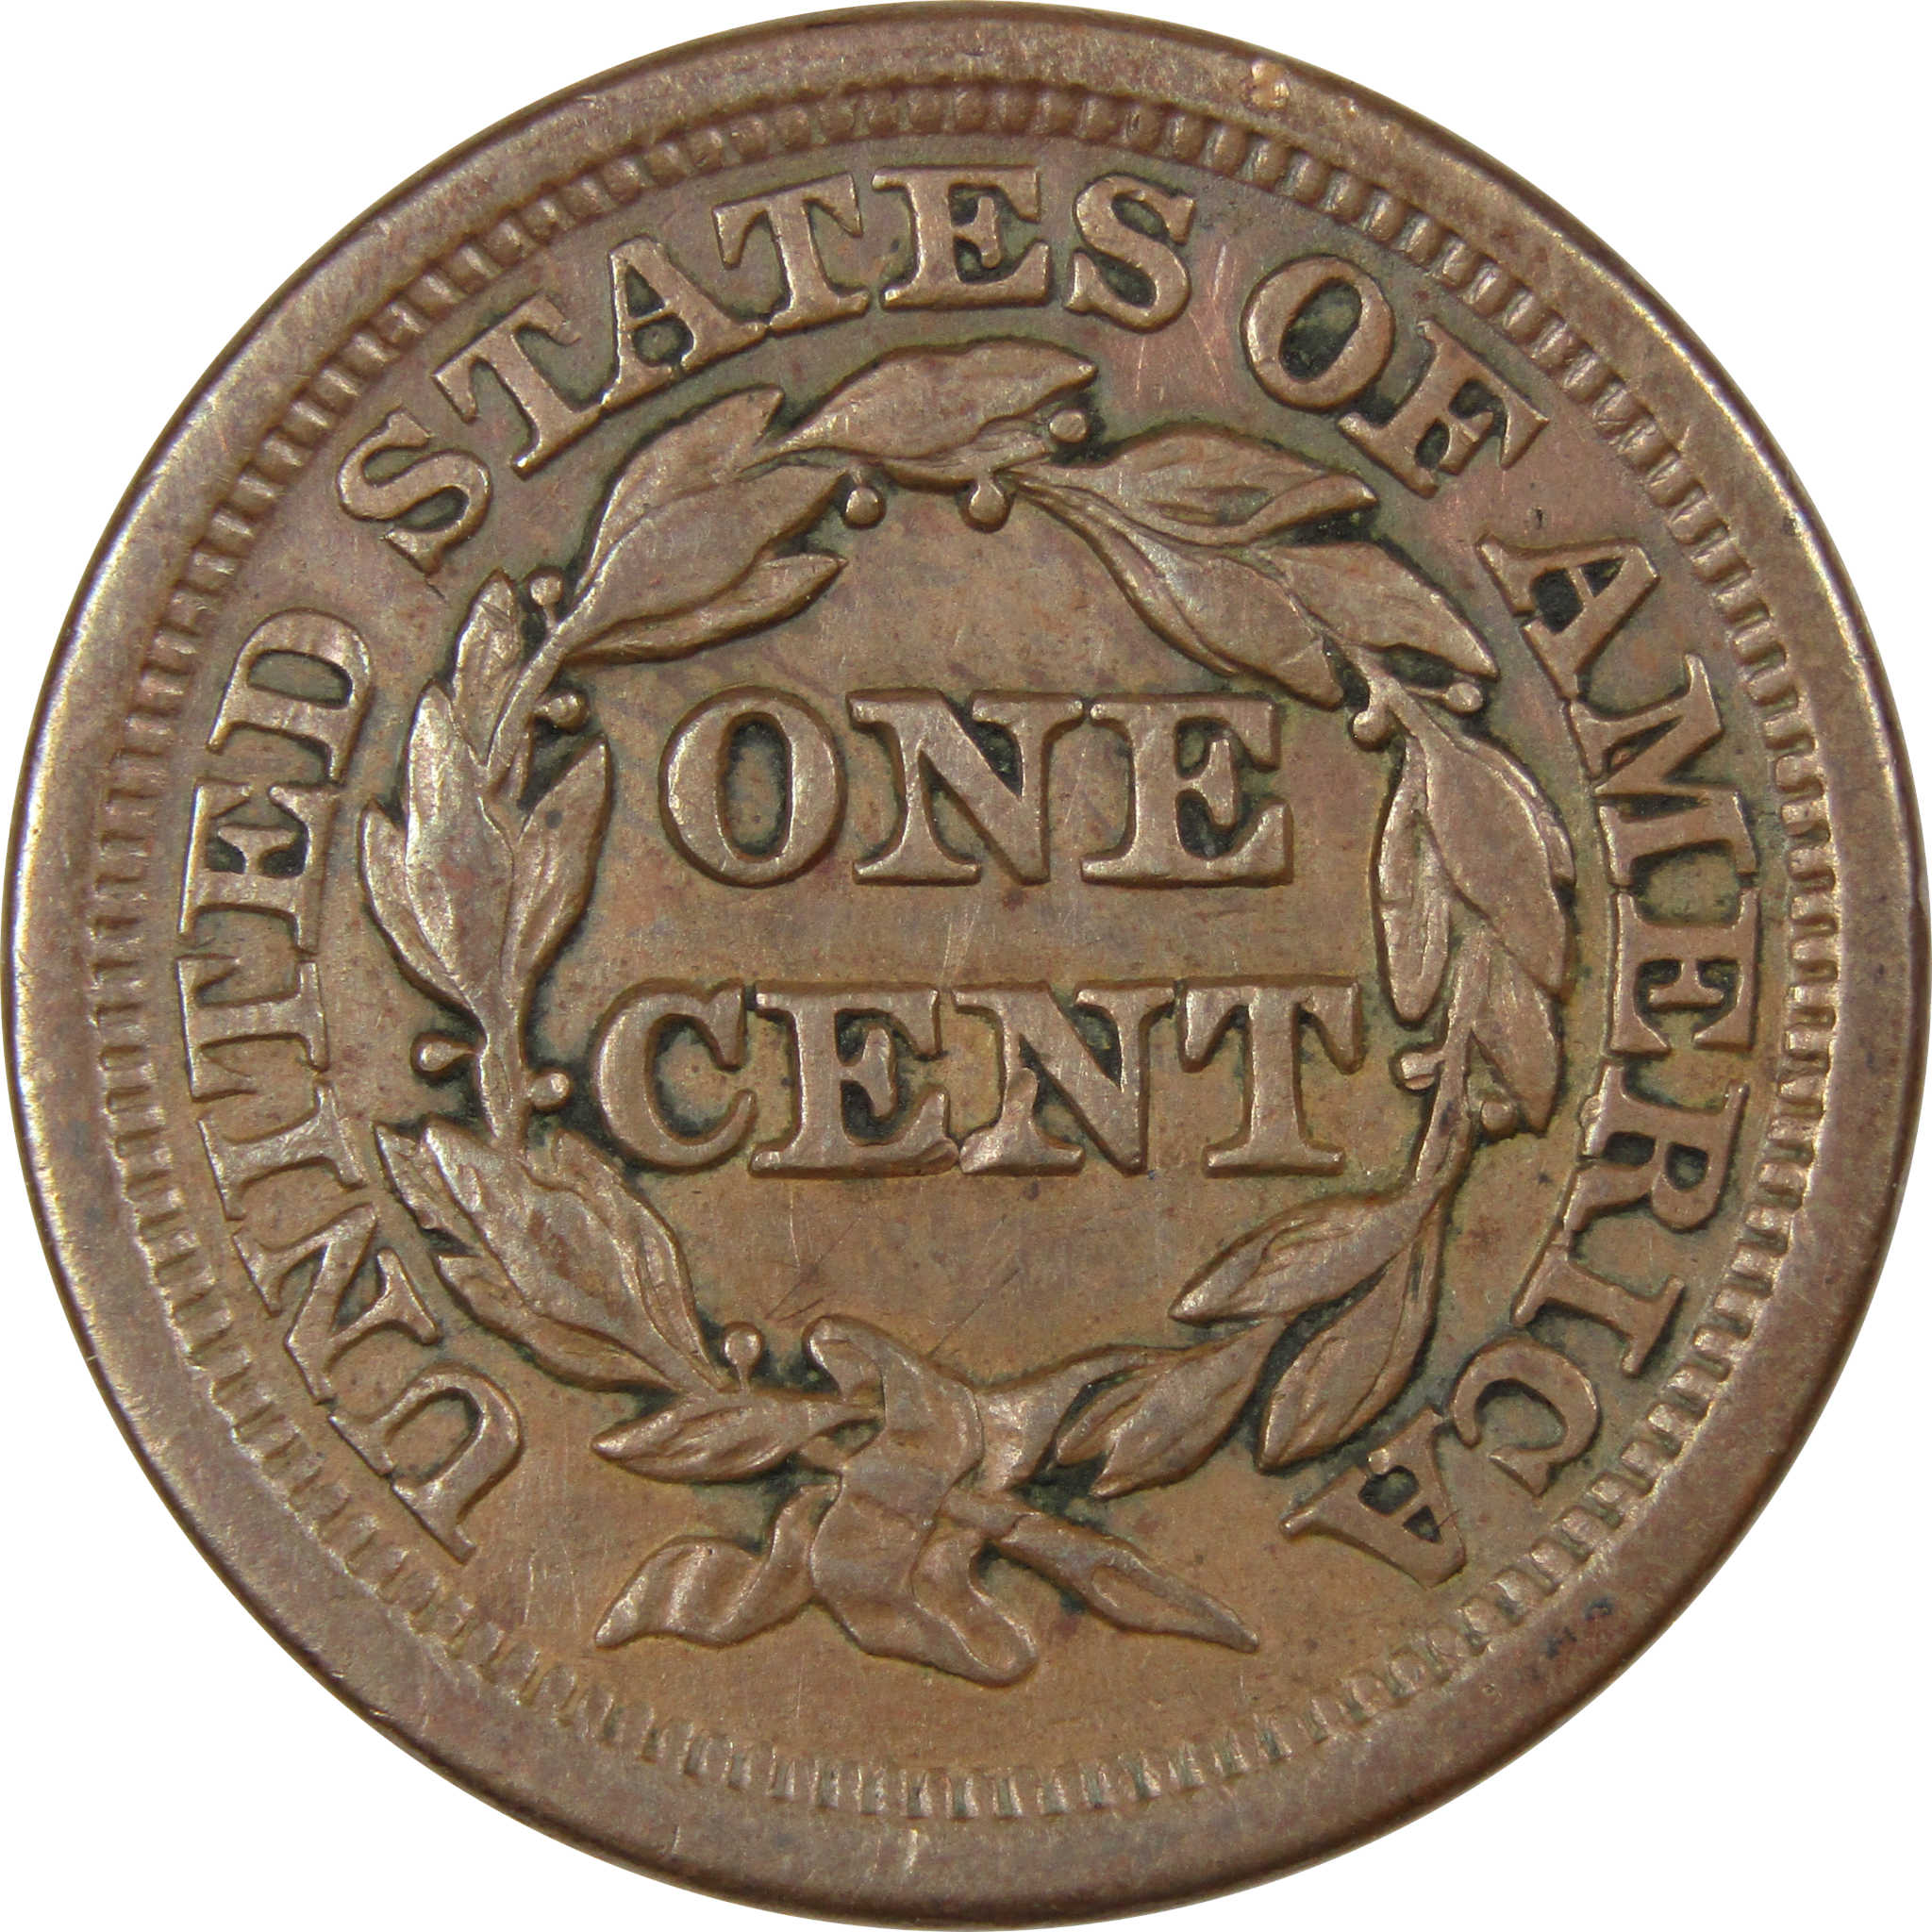 1854 Braided Hair Large Cent Extremely Fine Copper Penny SKU:IPC7266